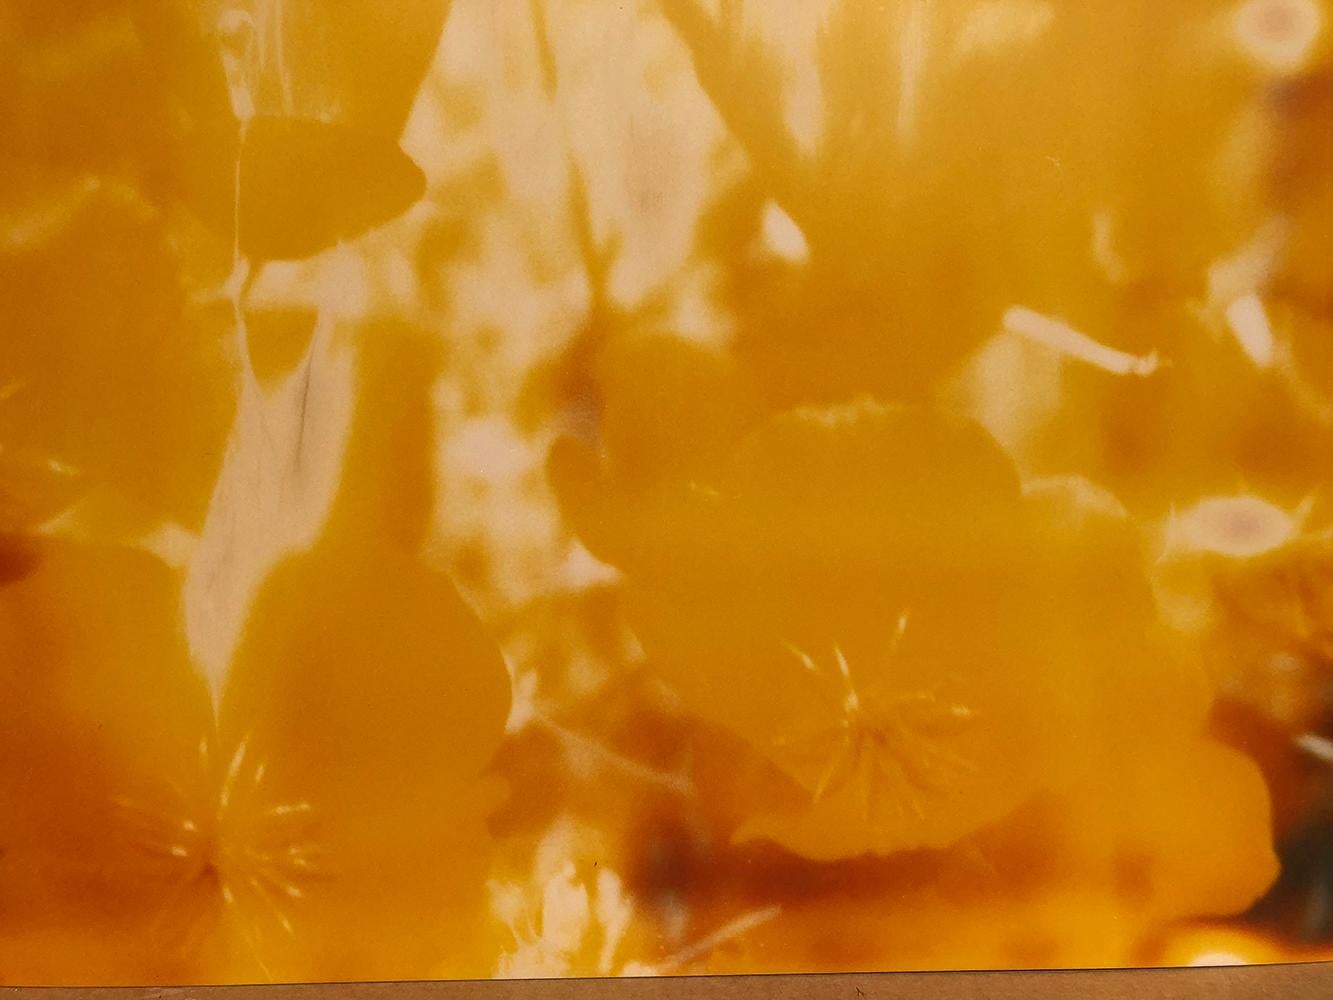 Yellow Flower (The Last Picture Show) 128x125cm, 2005, Edition 4/5, 
analog C-Print, hand-printed by the artist on Fuji Crystal Archive Paper, based on a Polaroid, signed on verso, Artist Inventory 672.04, 
mounted on Aluminum with matte